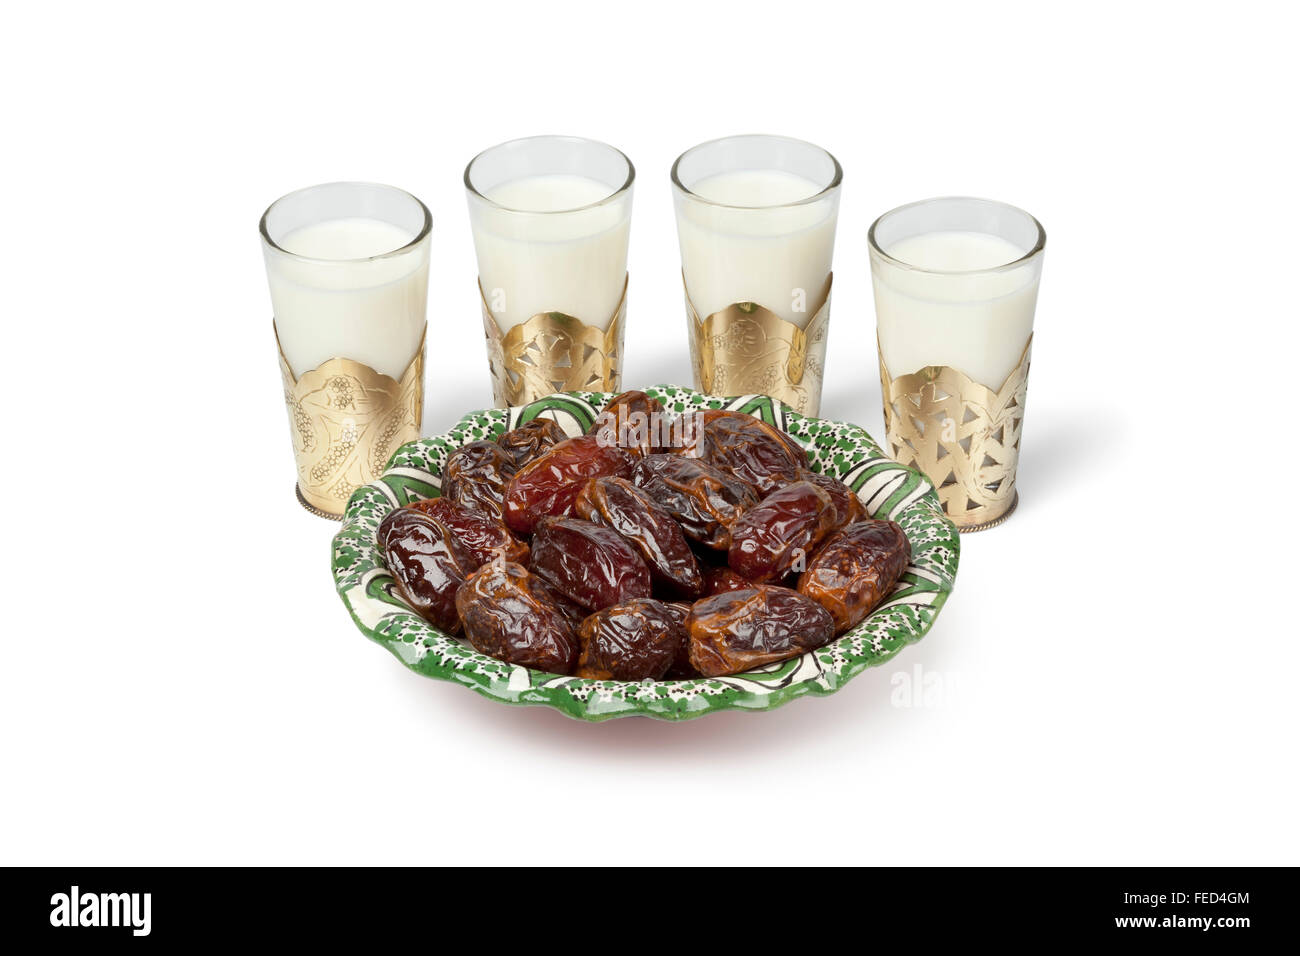 Milk and dates for Iftar meal on white background Stock Photo